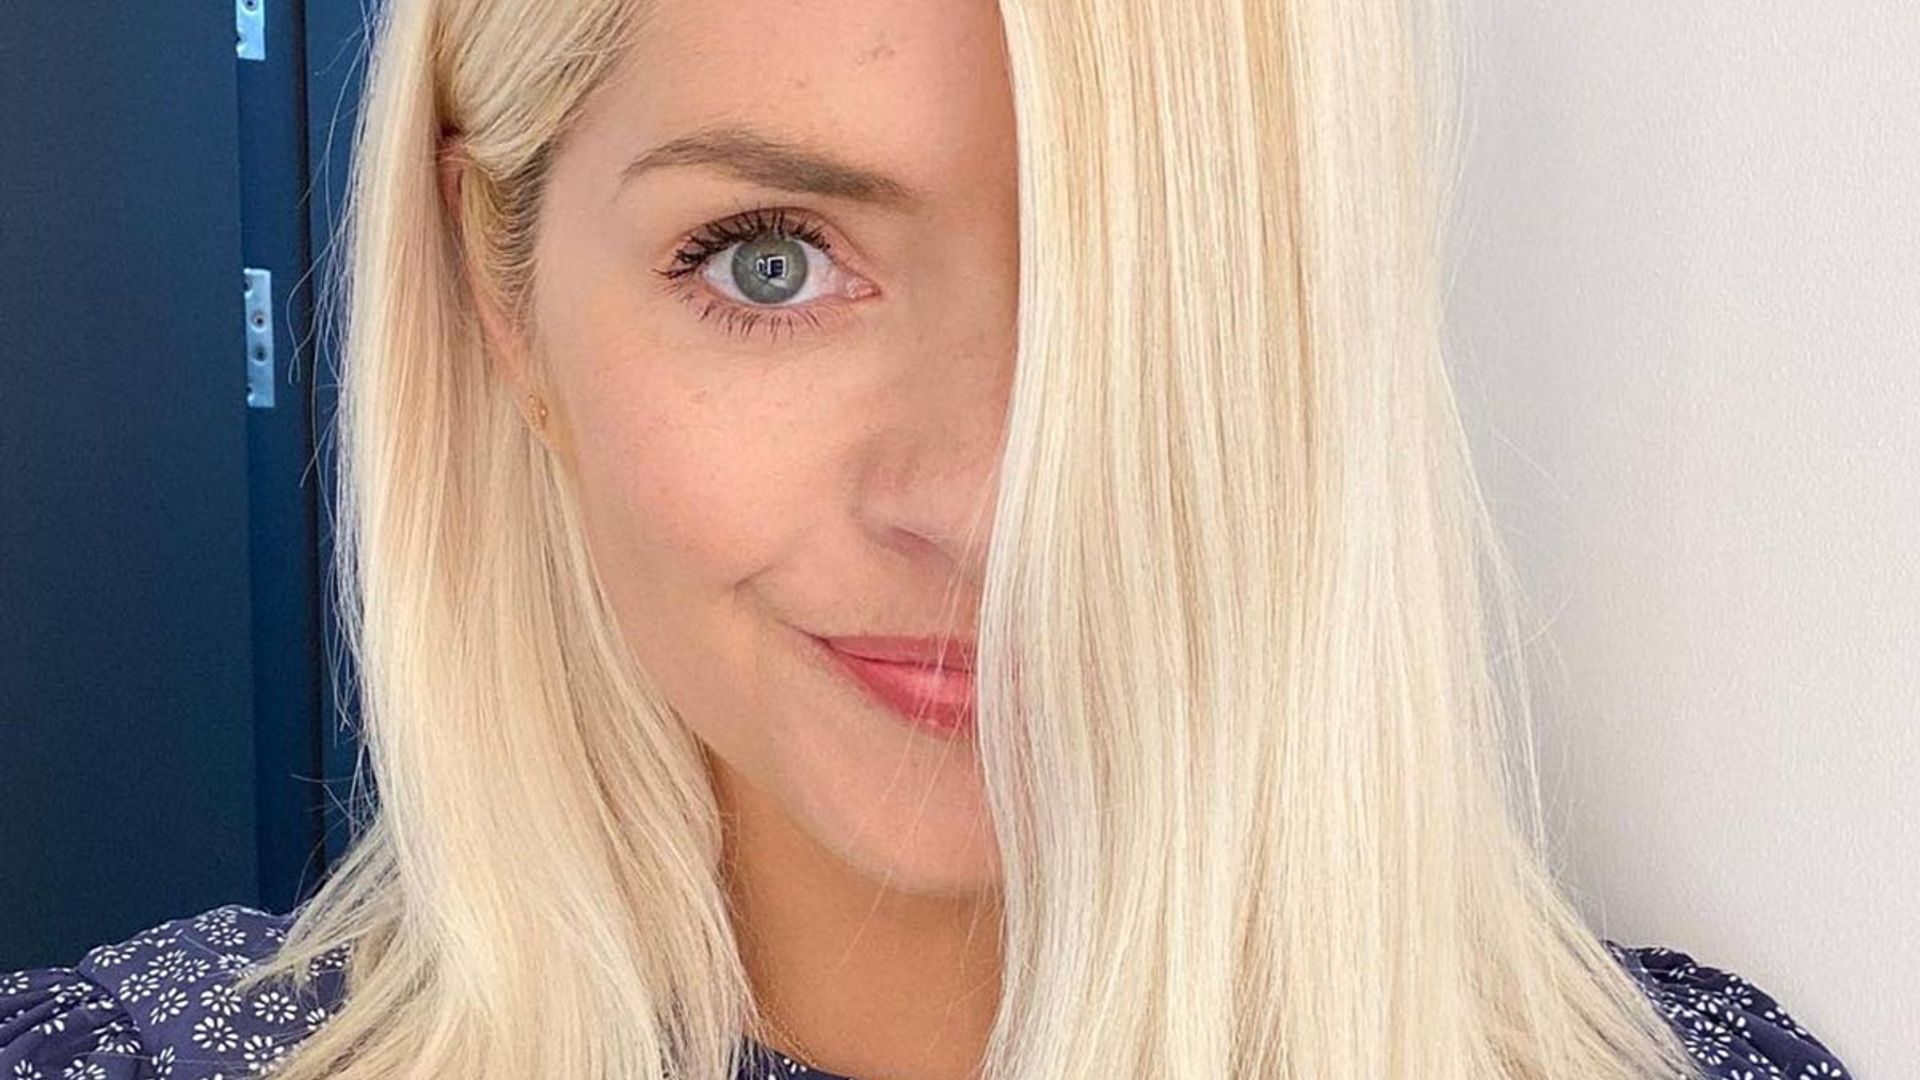 Holly Willoughby shares rare look at her secret piercing